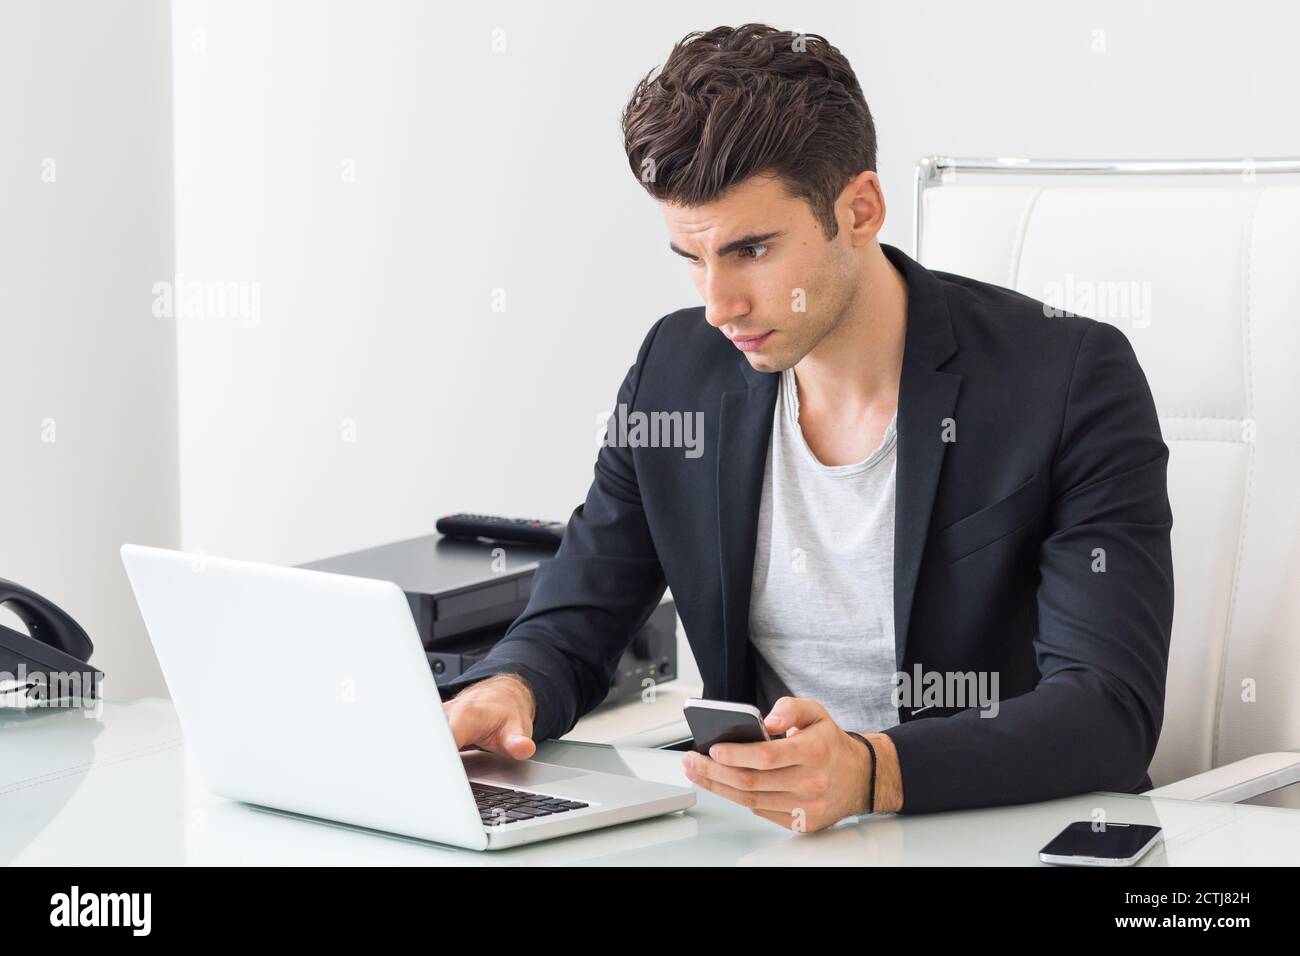 Focused businessman using a laptop computer and mobile phone at work. Stock Photo